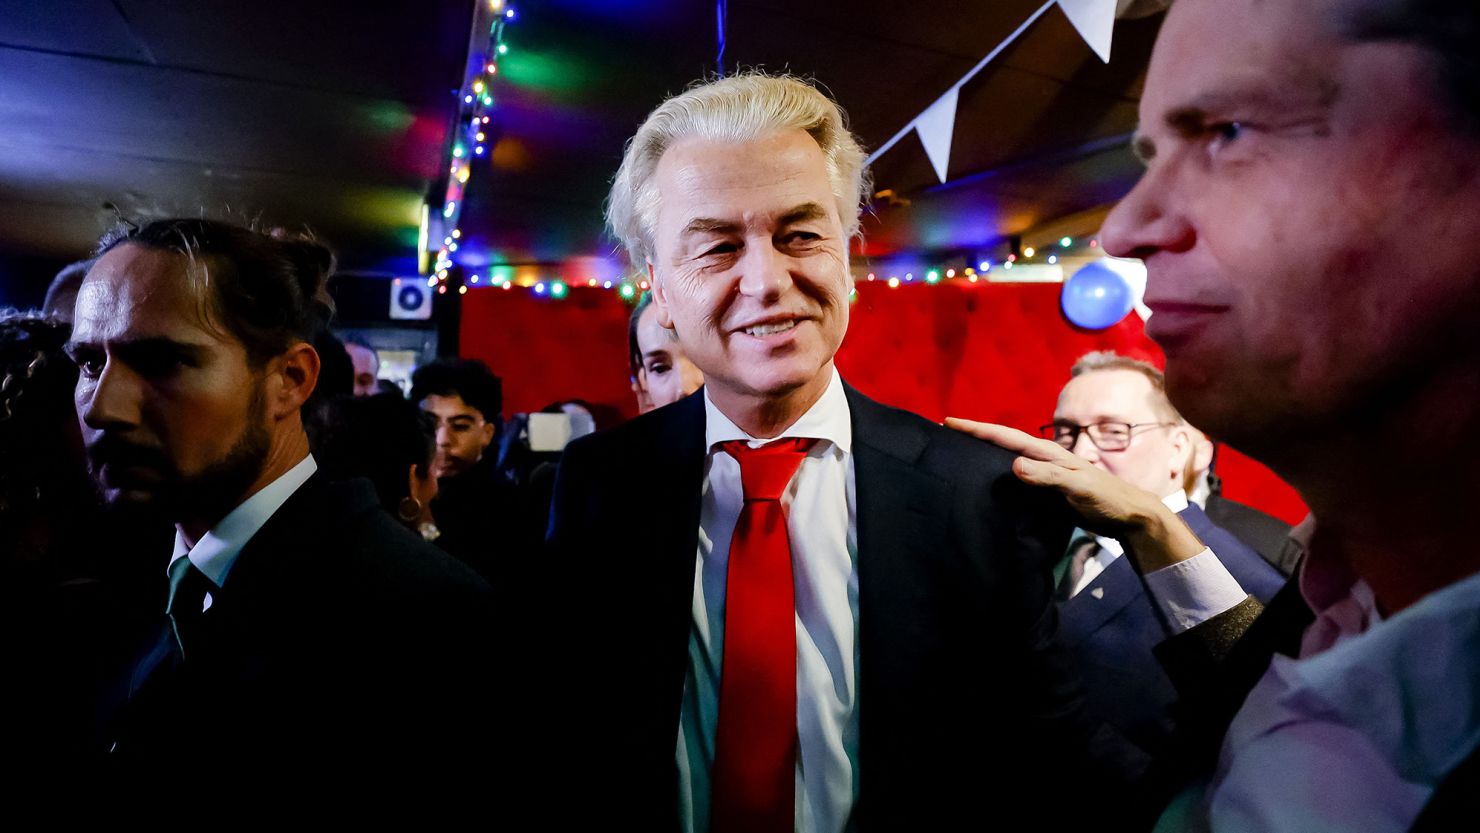 TOPSHOT - PVV leader Geert Wilders reacts to the results of the House of Representatives elections in Scheveningen, the Netherlands, 22 November 2023. The far-right, anti-Islam party of firebrand politician Geert Wilders has won a stunning victory in the Dutch election, partial results showed Wednesday, a political bombshell that will resound in Europe and around the world. (Photo by Remko de Waal / ANP / AFP) / Netherlands OUT - Belgium OUT (Photo by REMKO DE WAAL/ANP/AFP via Getty Images)